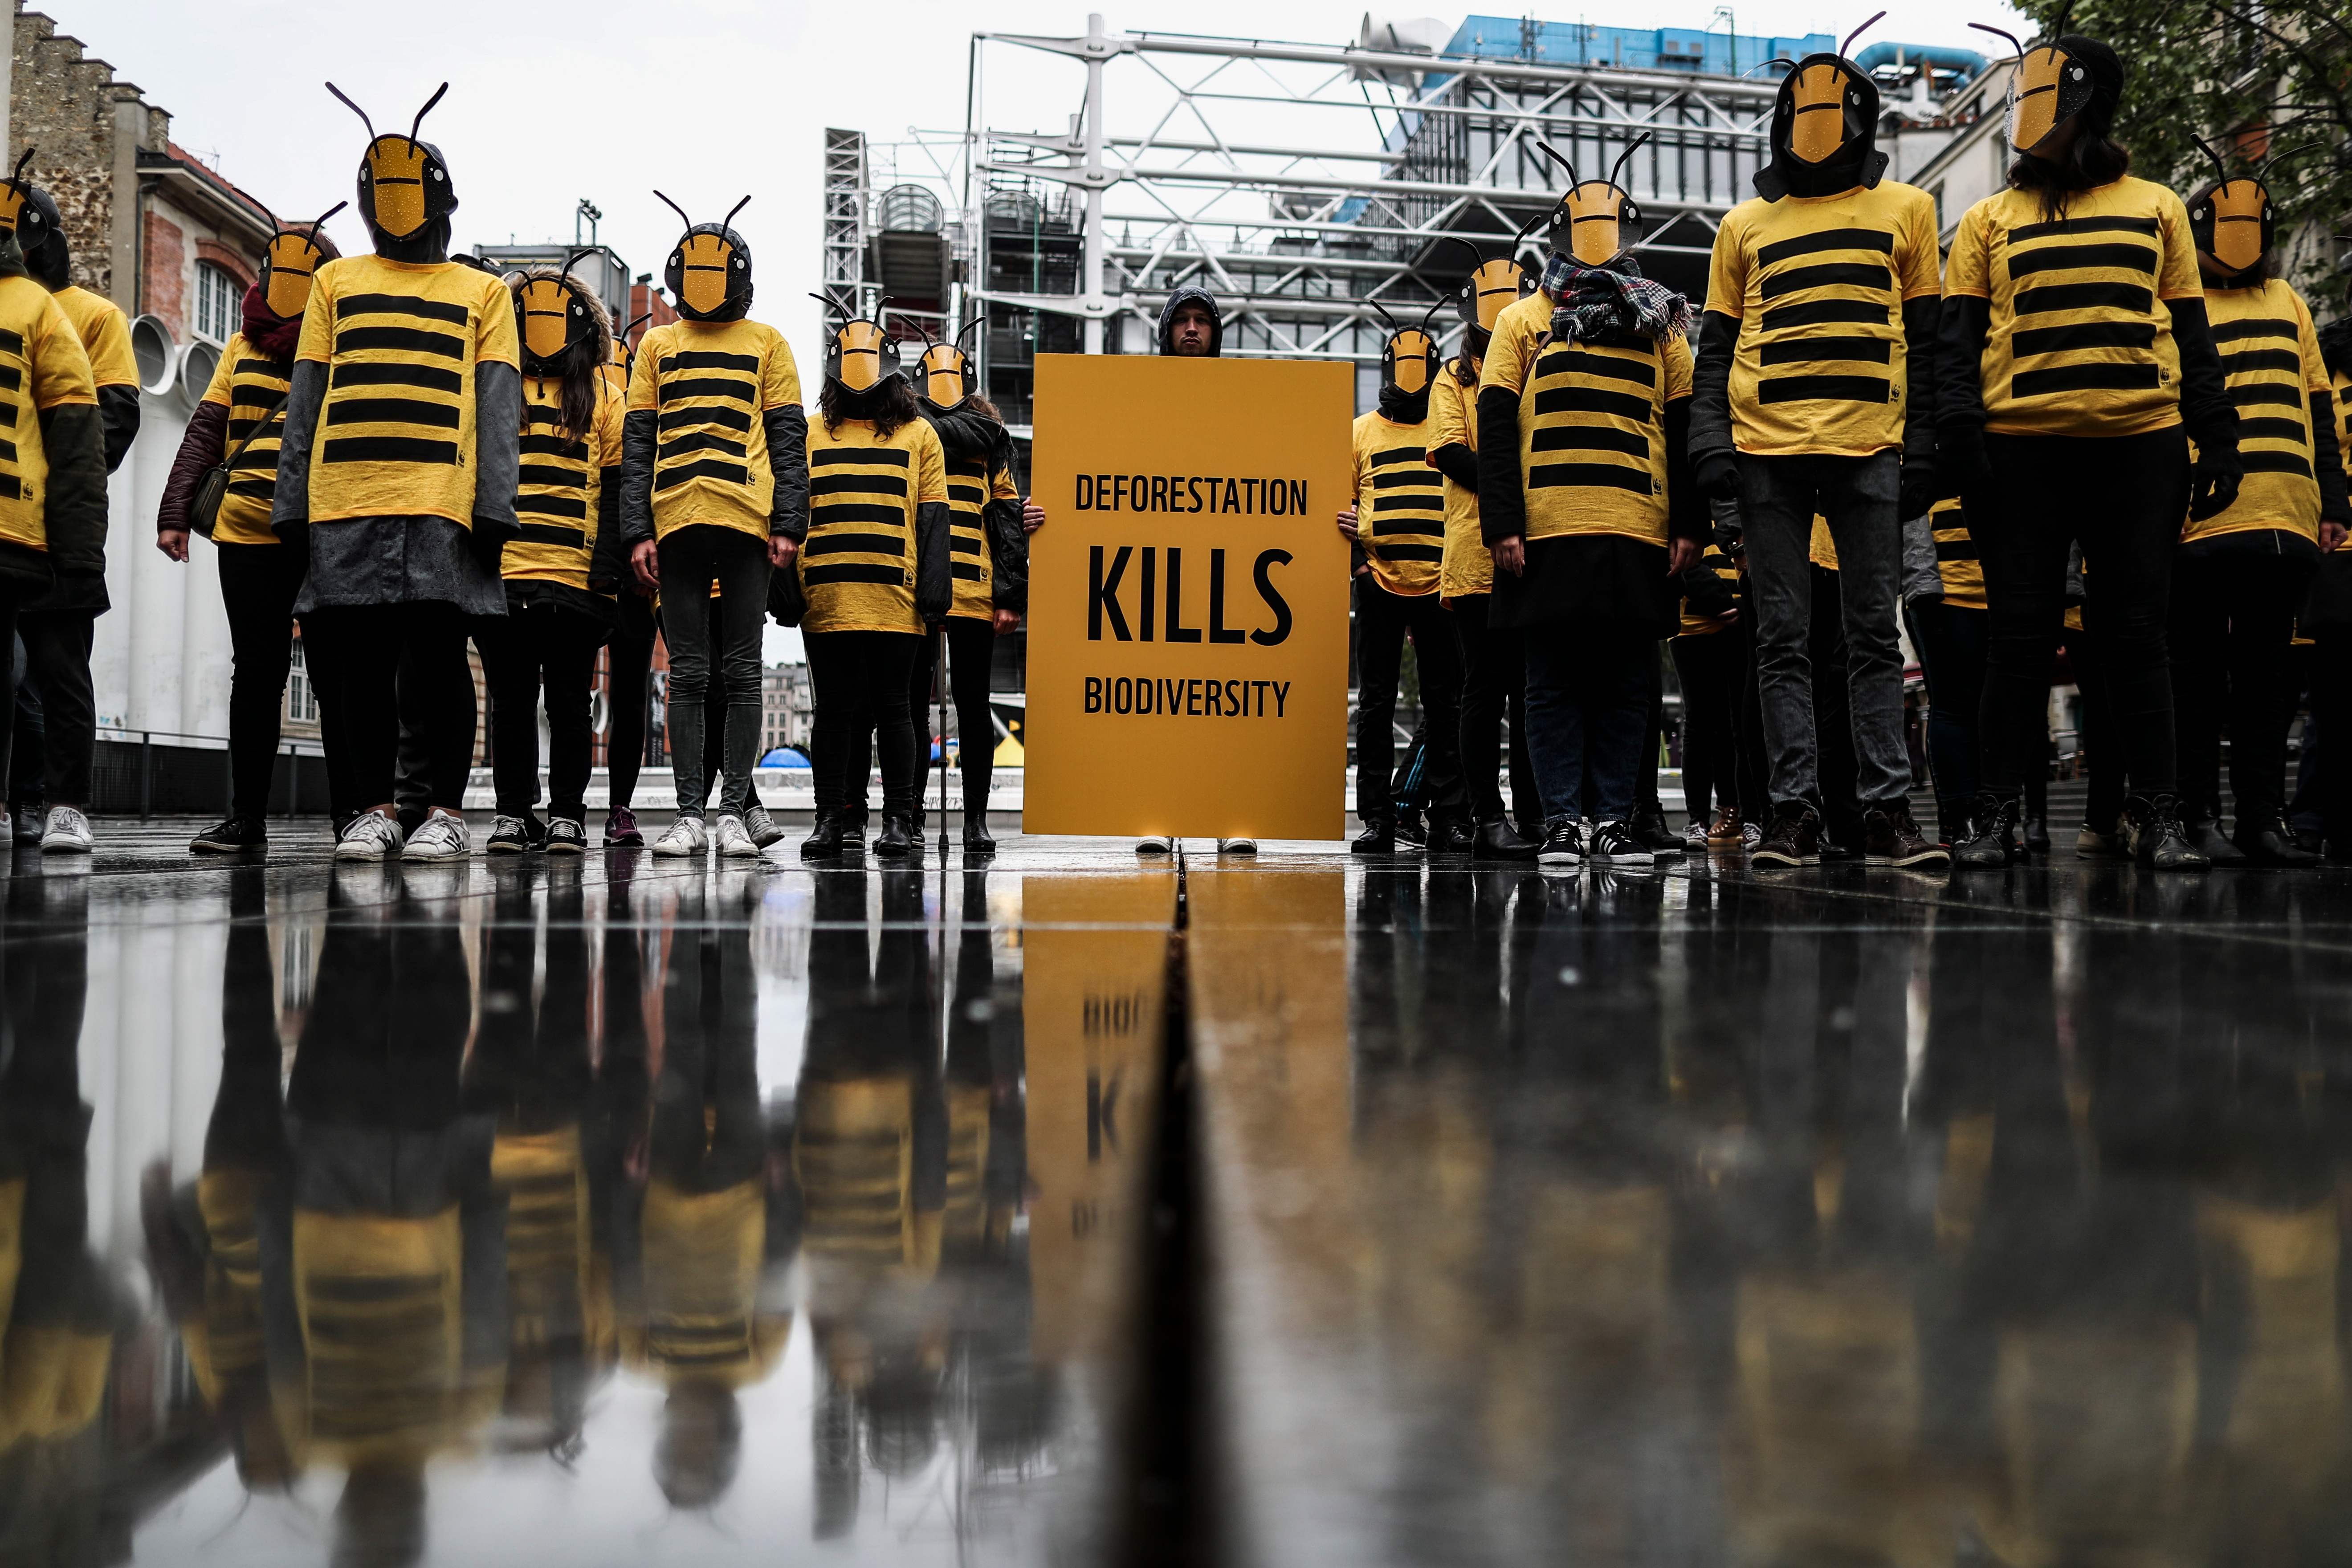 Demonstrators stand wearing bees masks and costumes during a demonstration for biodiversity called by the World Wildlife Fund for Nature (WWF) on May 4, 2019 in Paris. (Photo by KENZO TRIBOUILLARD / AFP)